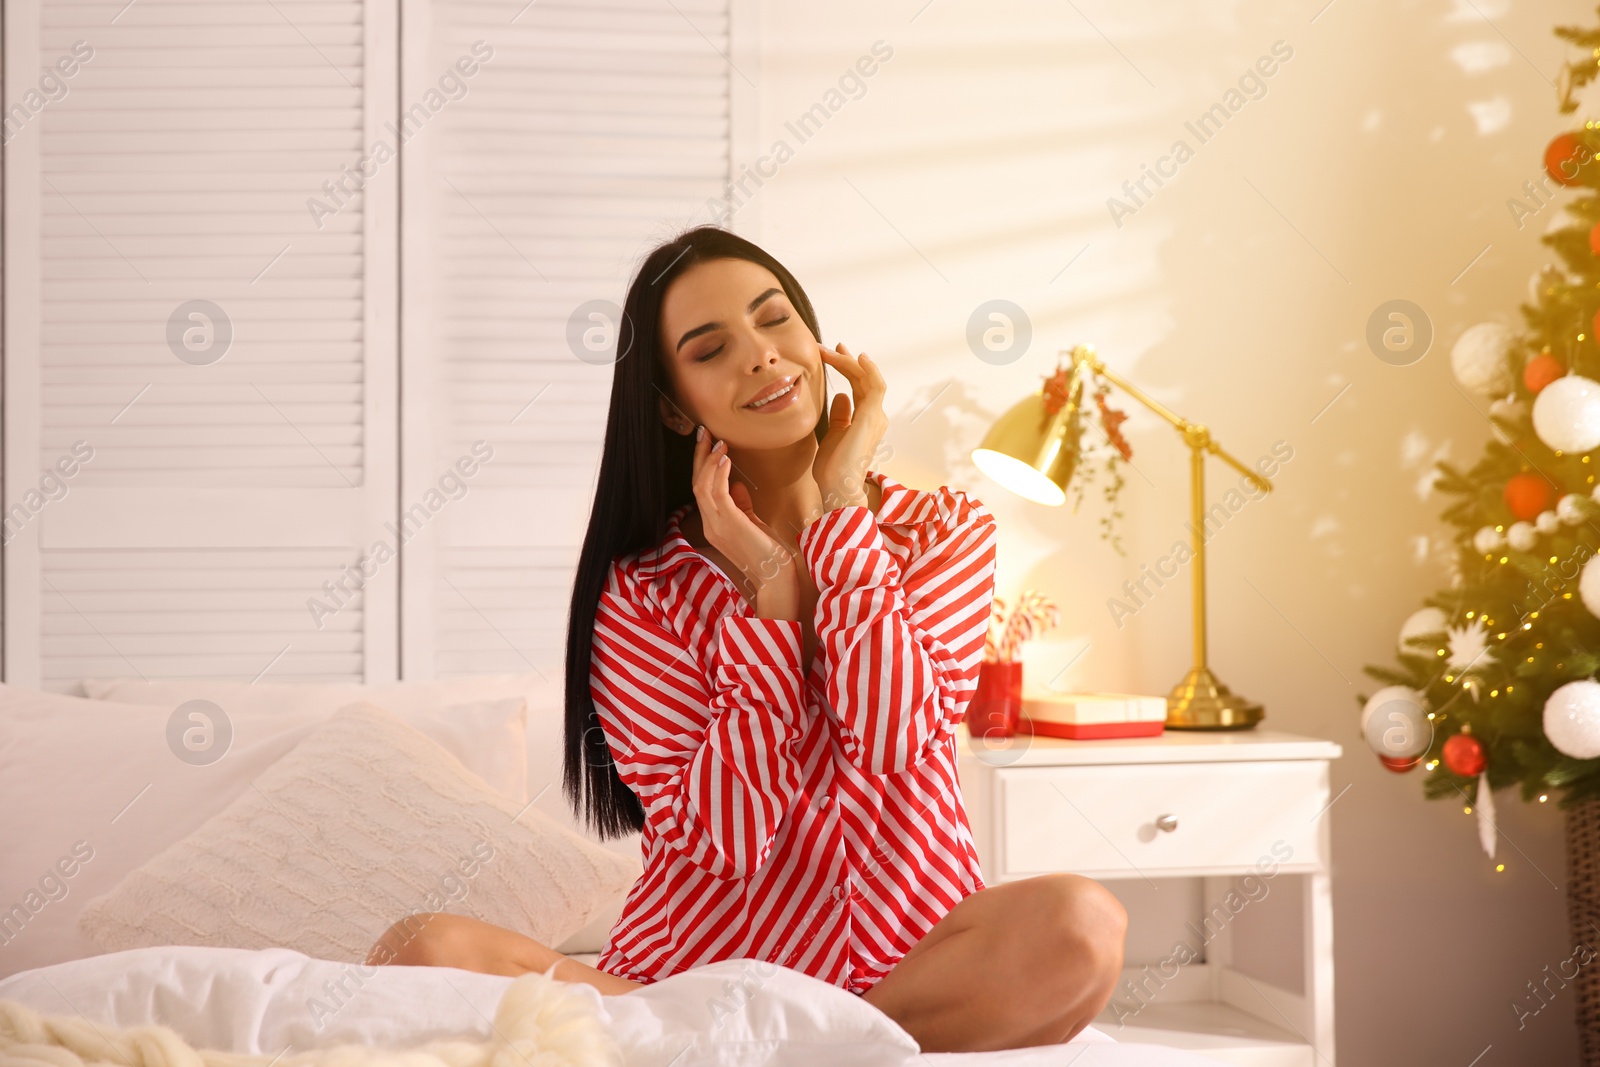 Photo of Young woman sitting on bed in room with Christmas tree